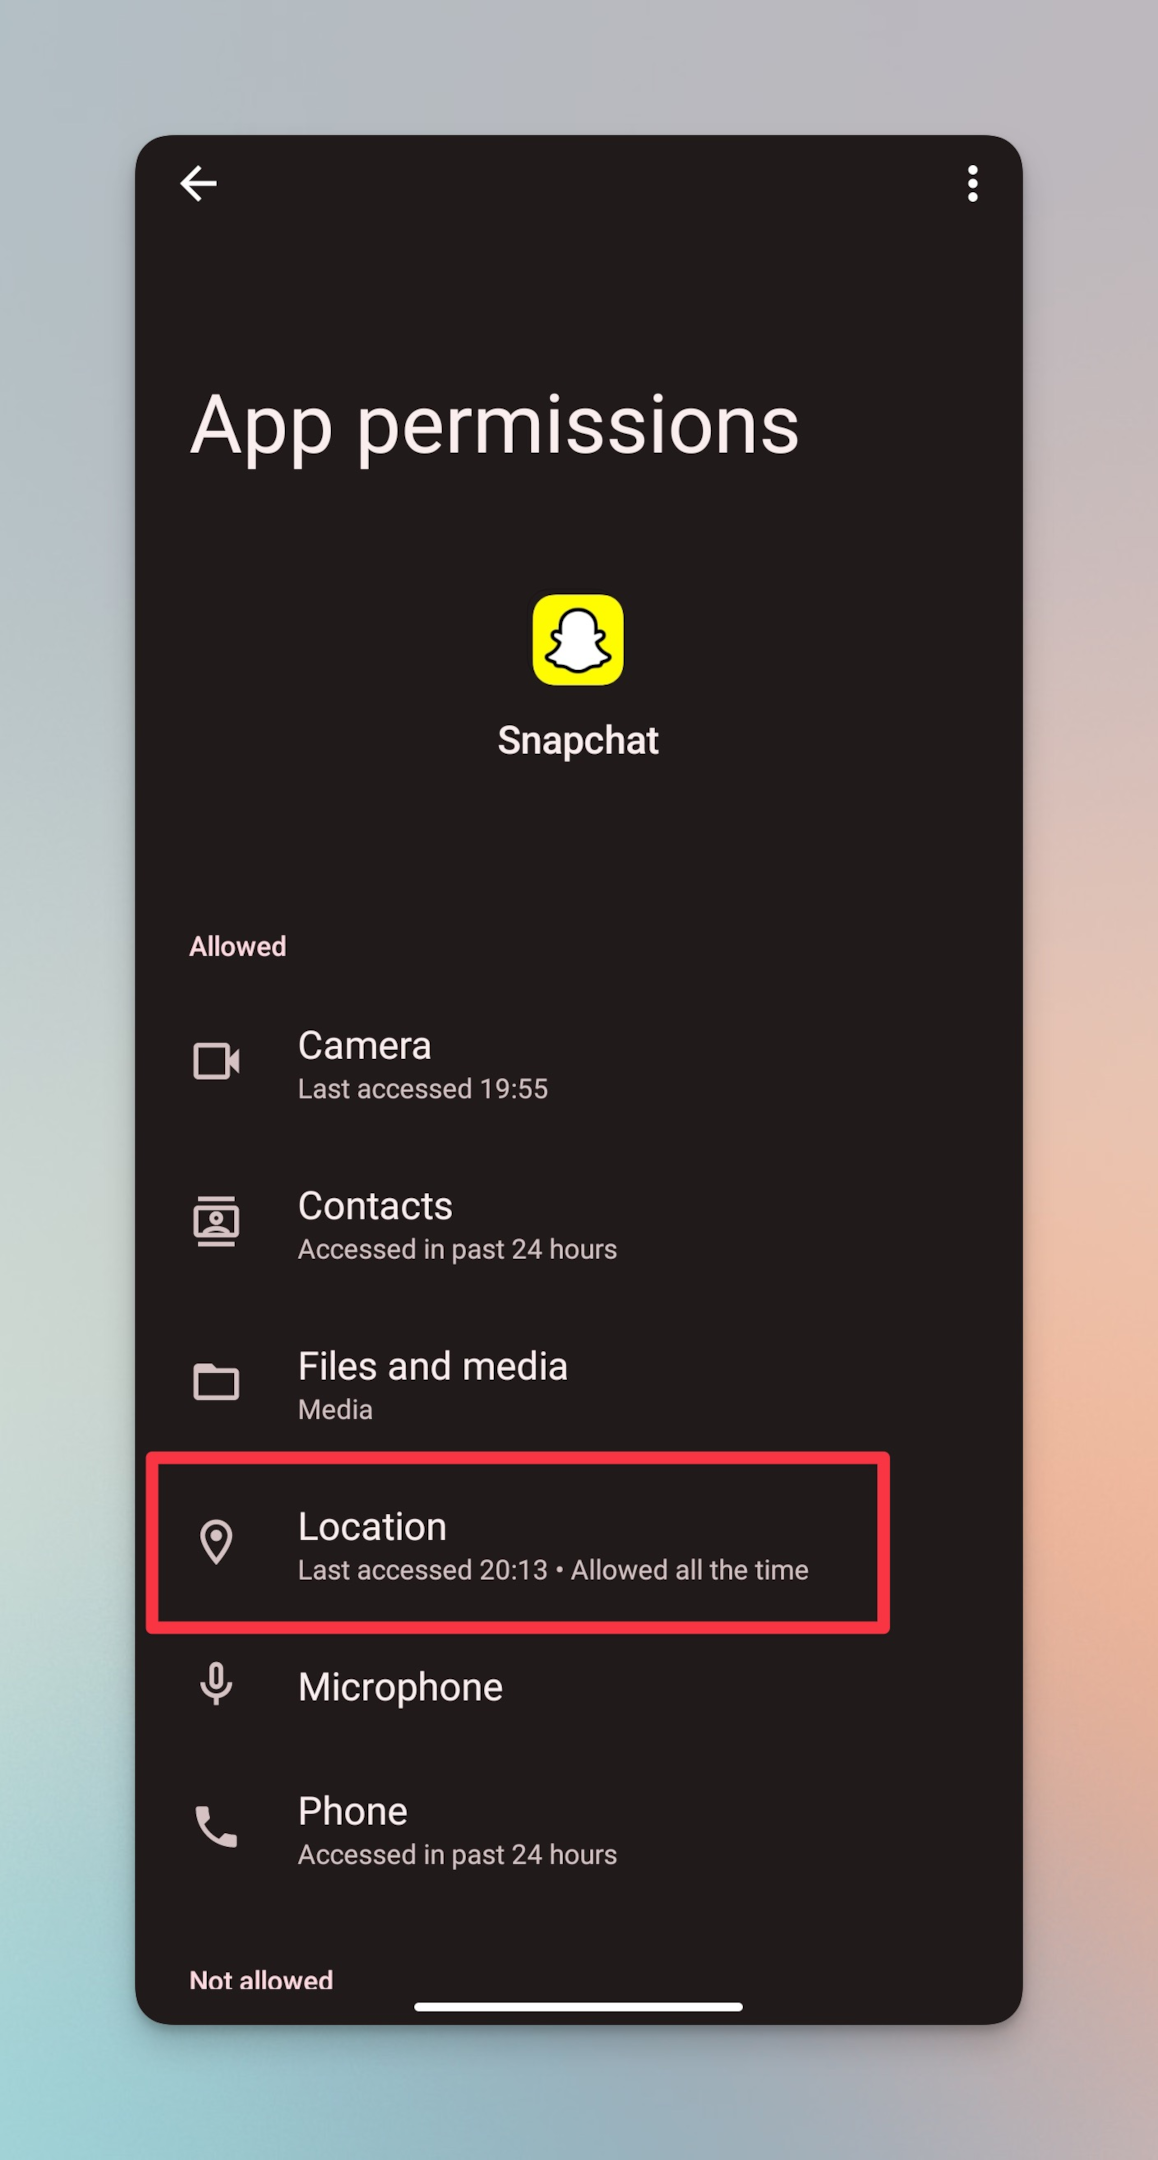 Remote.tools highlighting Location settings for Snapchat. Keep in mind, if you don't share your location, you may not be able to see people's locations in snap stories as well.